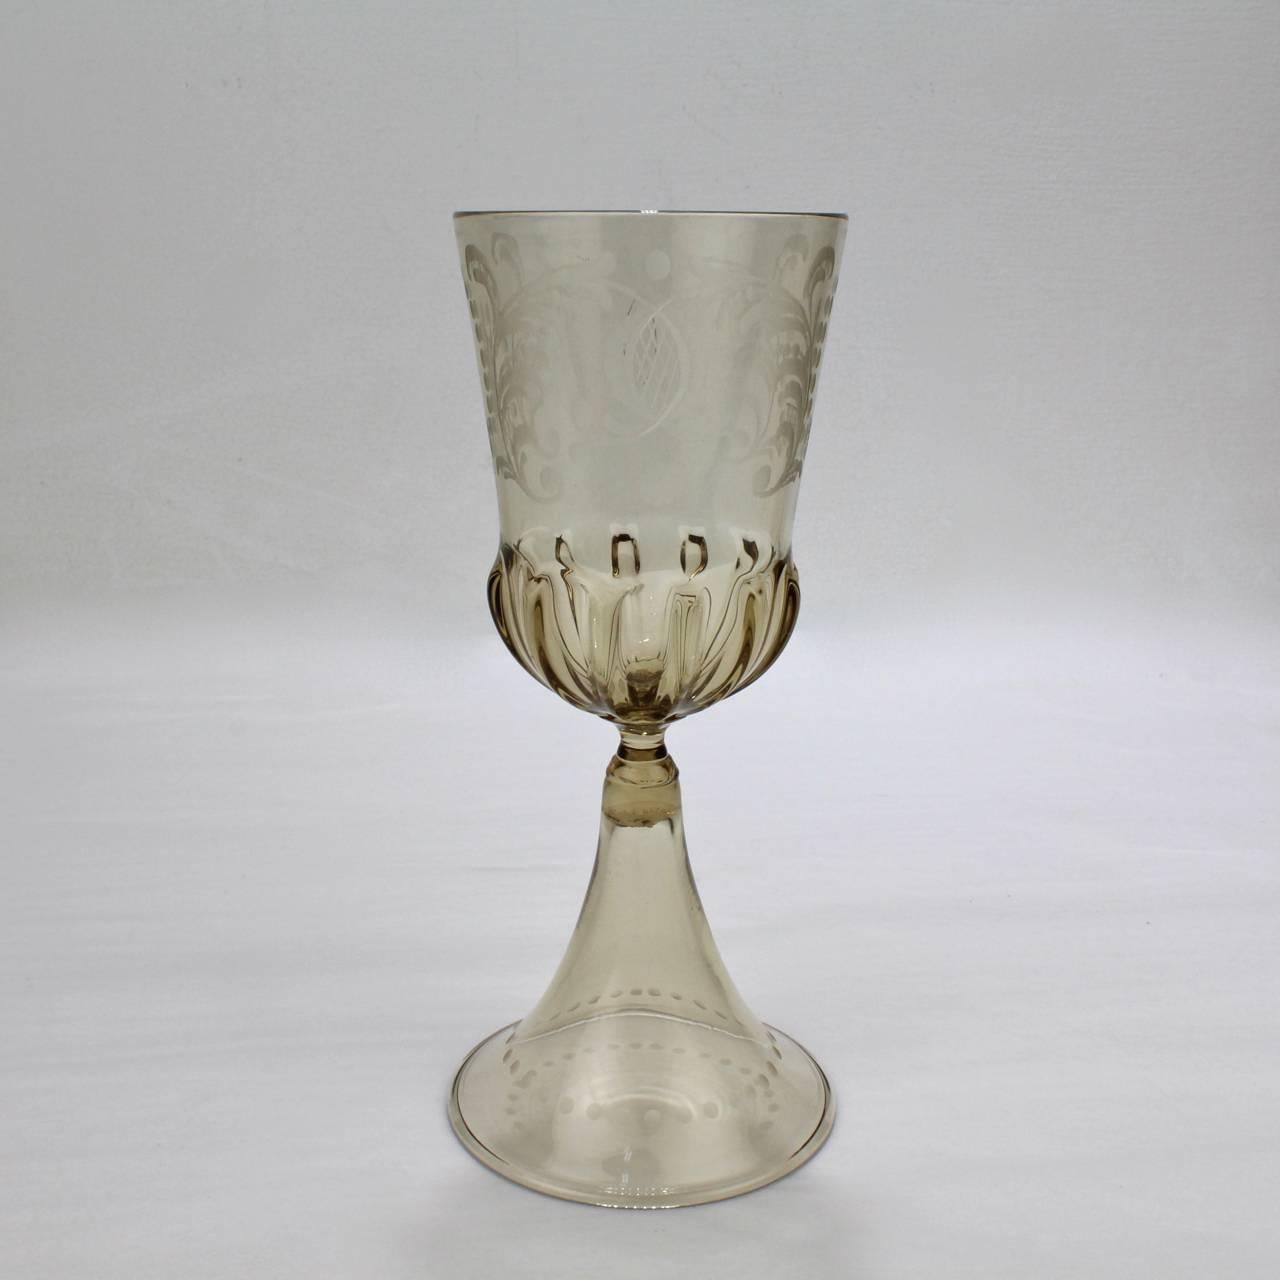 A good group of vintage Venetian glass wine or water goblets.

Each with a large cup capacity and very delicate hand feel.

Manufactured by Pauly and Co. in Venice, Italy in a light amber blown glass with a large cup with Renaissance style etching